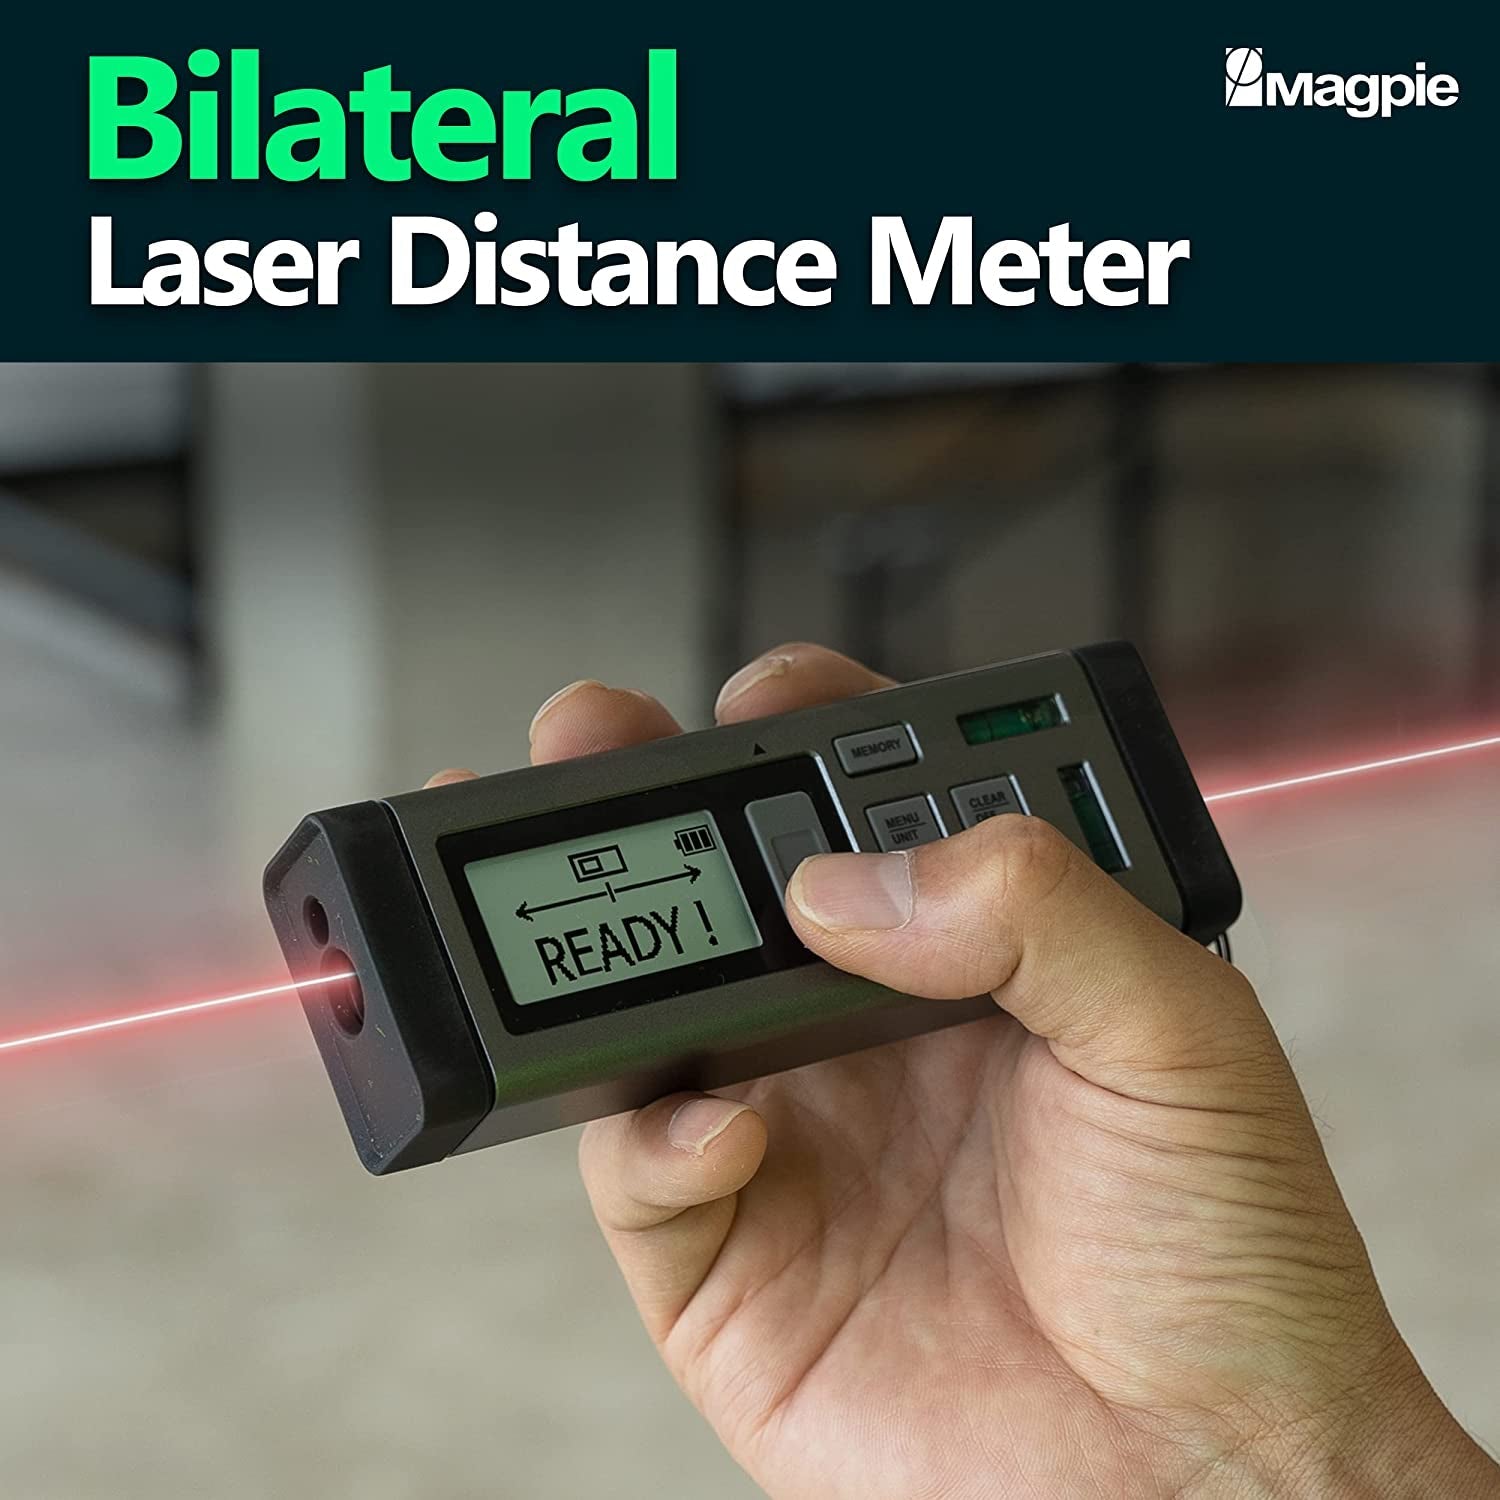 Laser Measurement Tool,Dual Laser Measure 262ft/80m,M/in/Ft Unit Switching  Rechargeable Laser Measurement Tool for Fast, Precise Results,Pythagorean